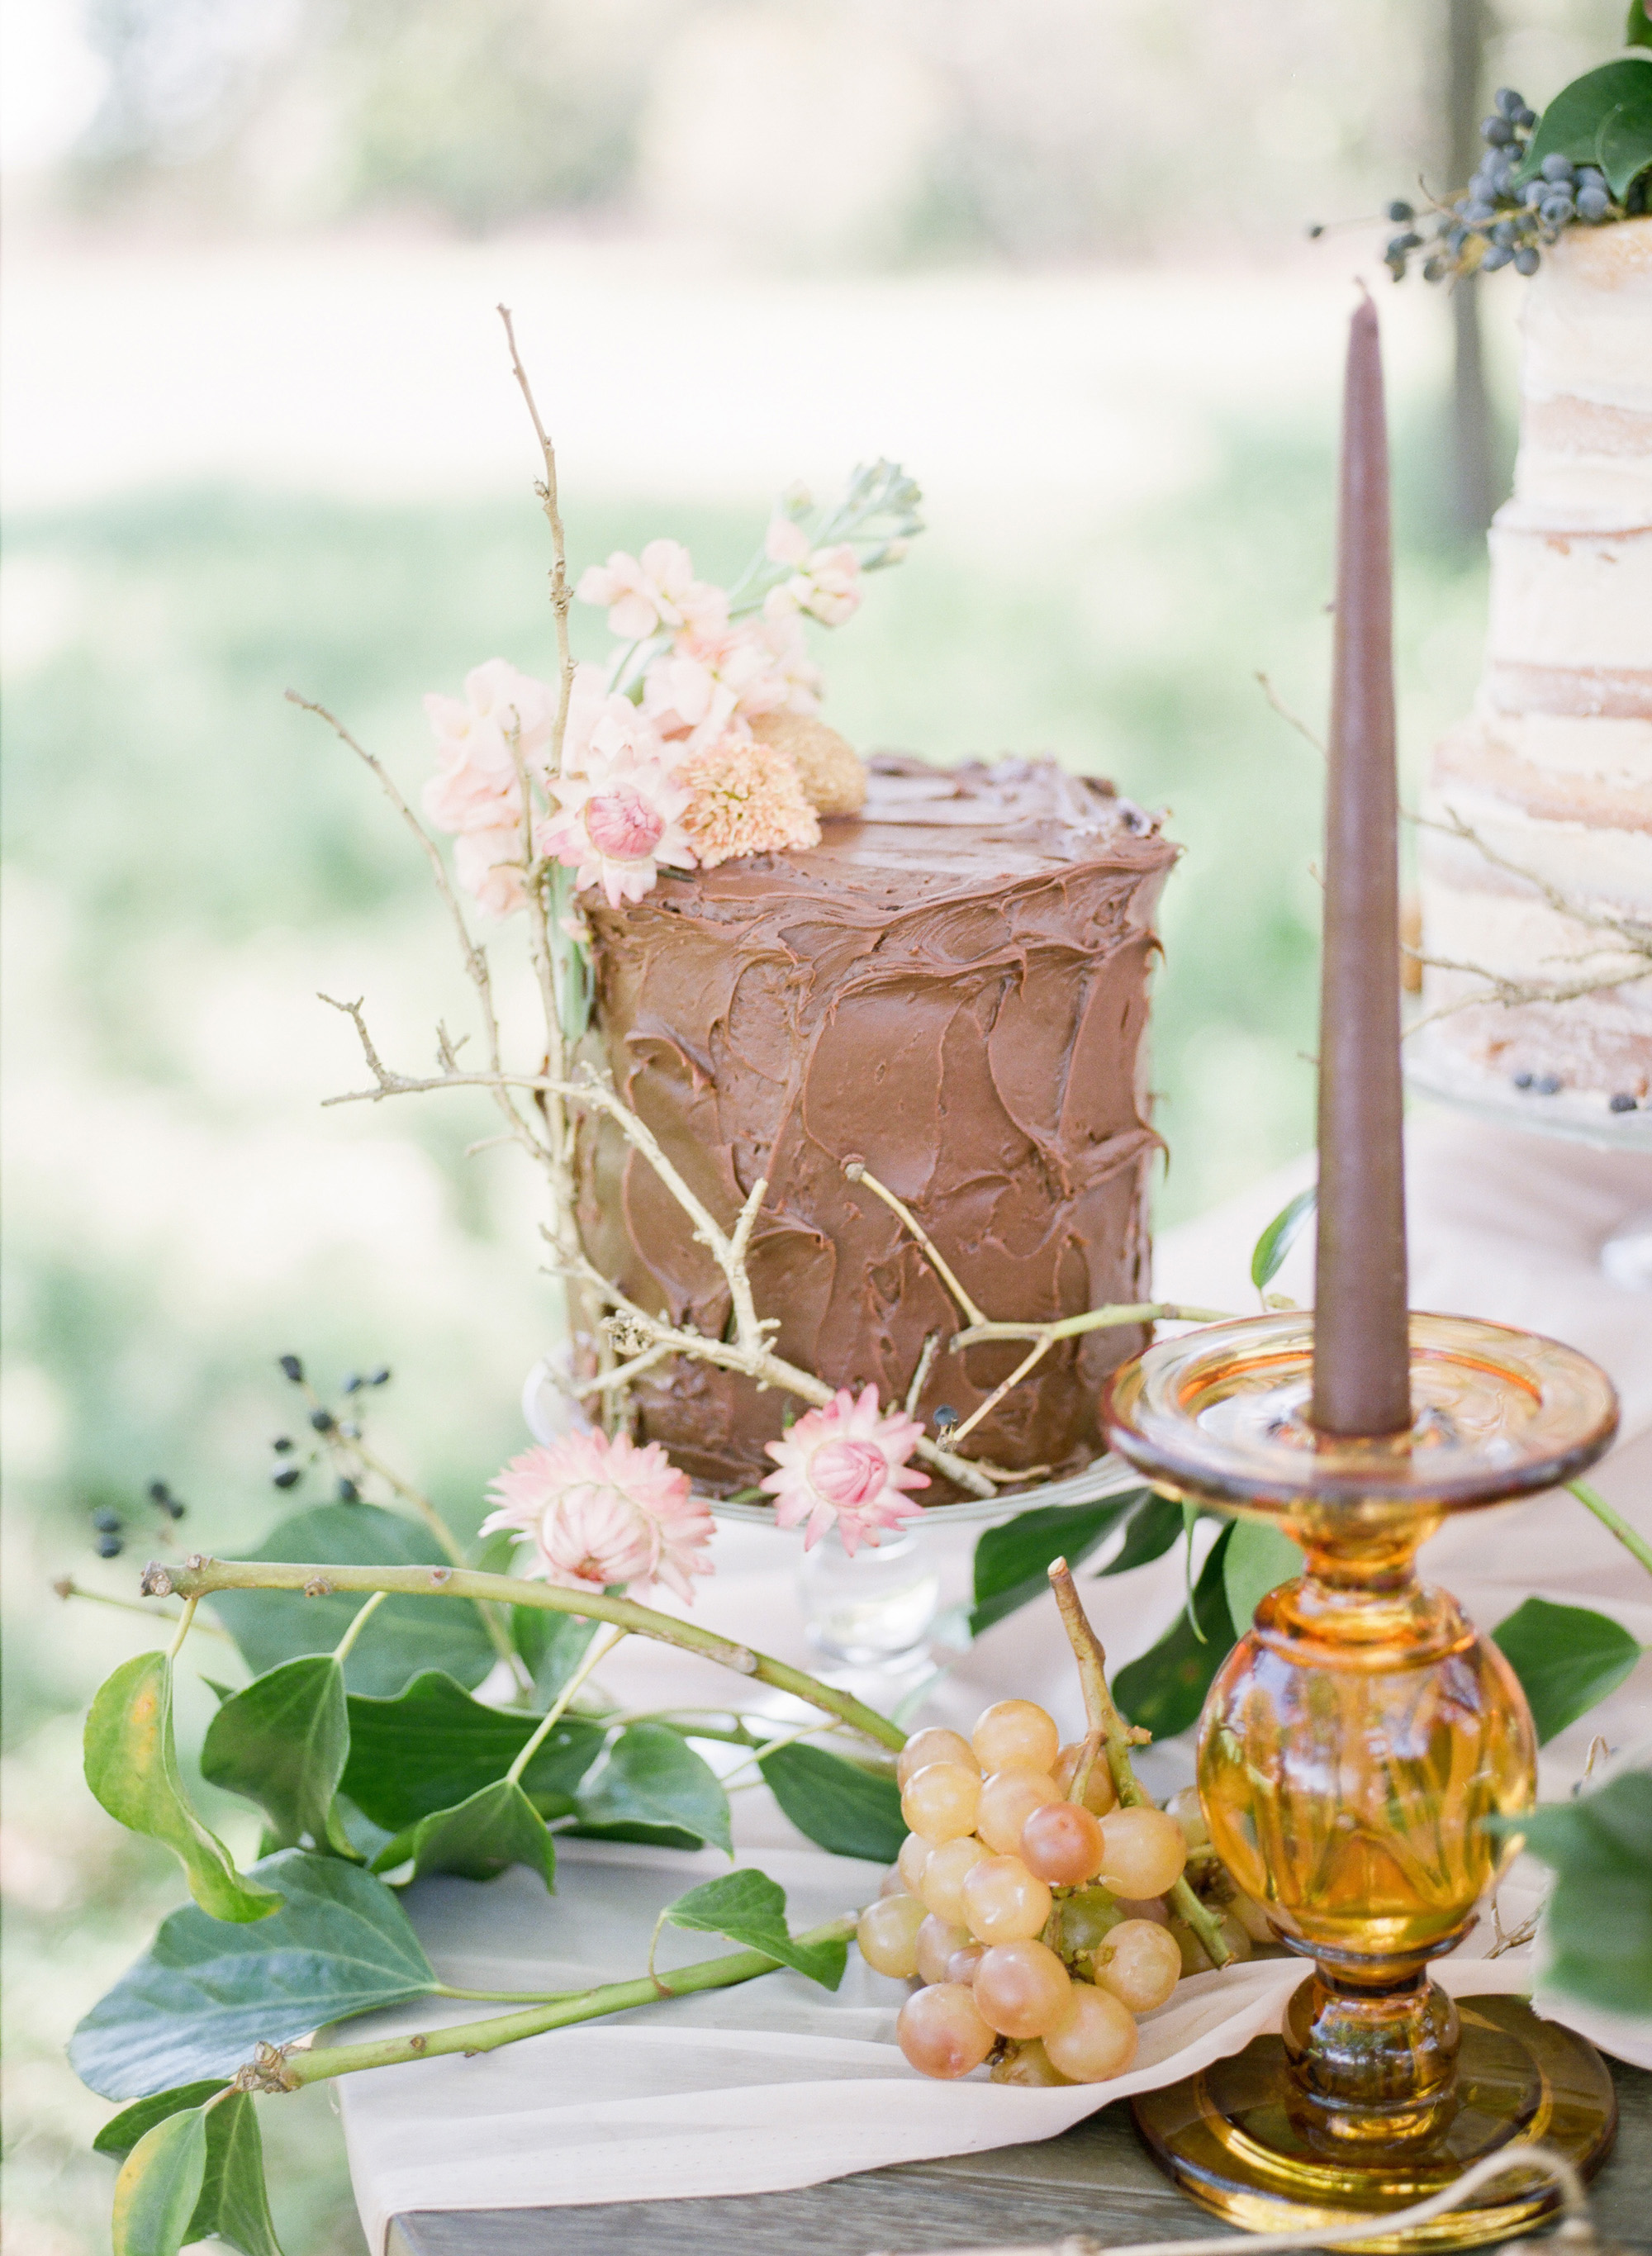 Wedding cake for a Dallas wedding captured by DFW wedding photographer Tenth & Grace.